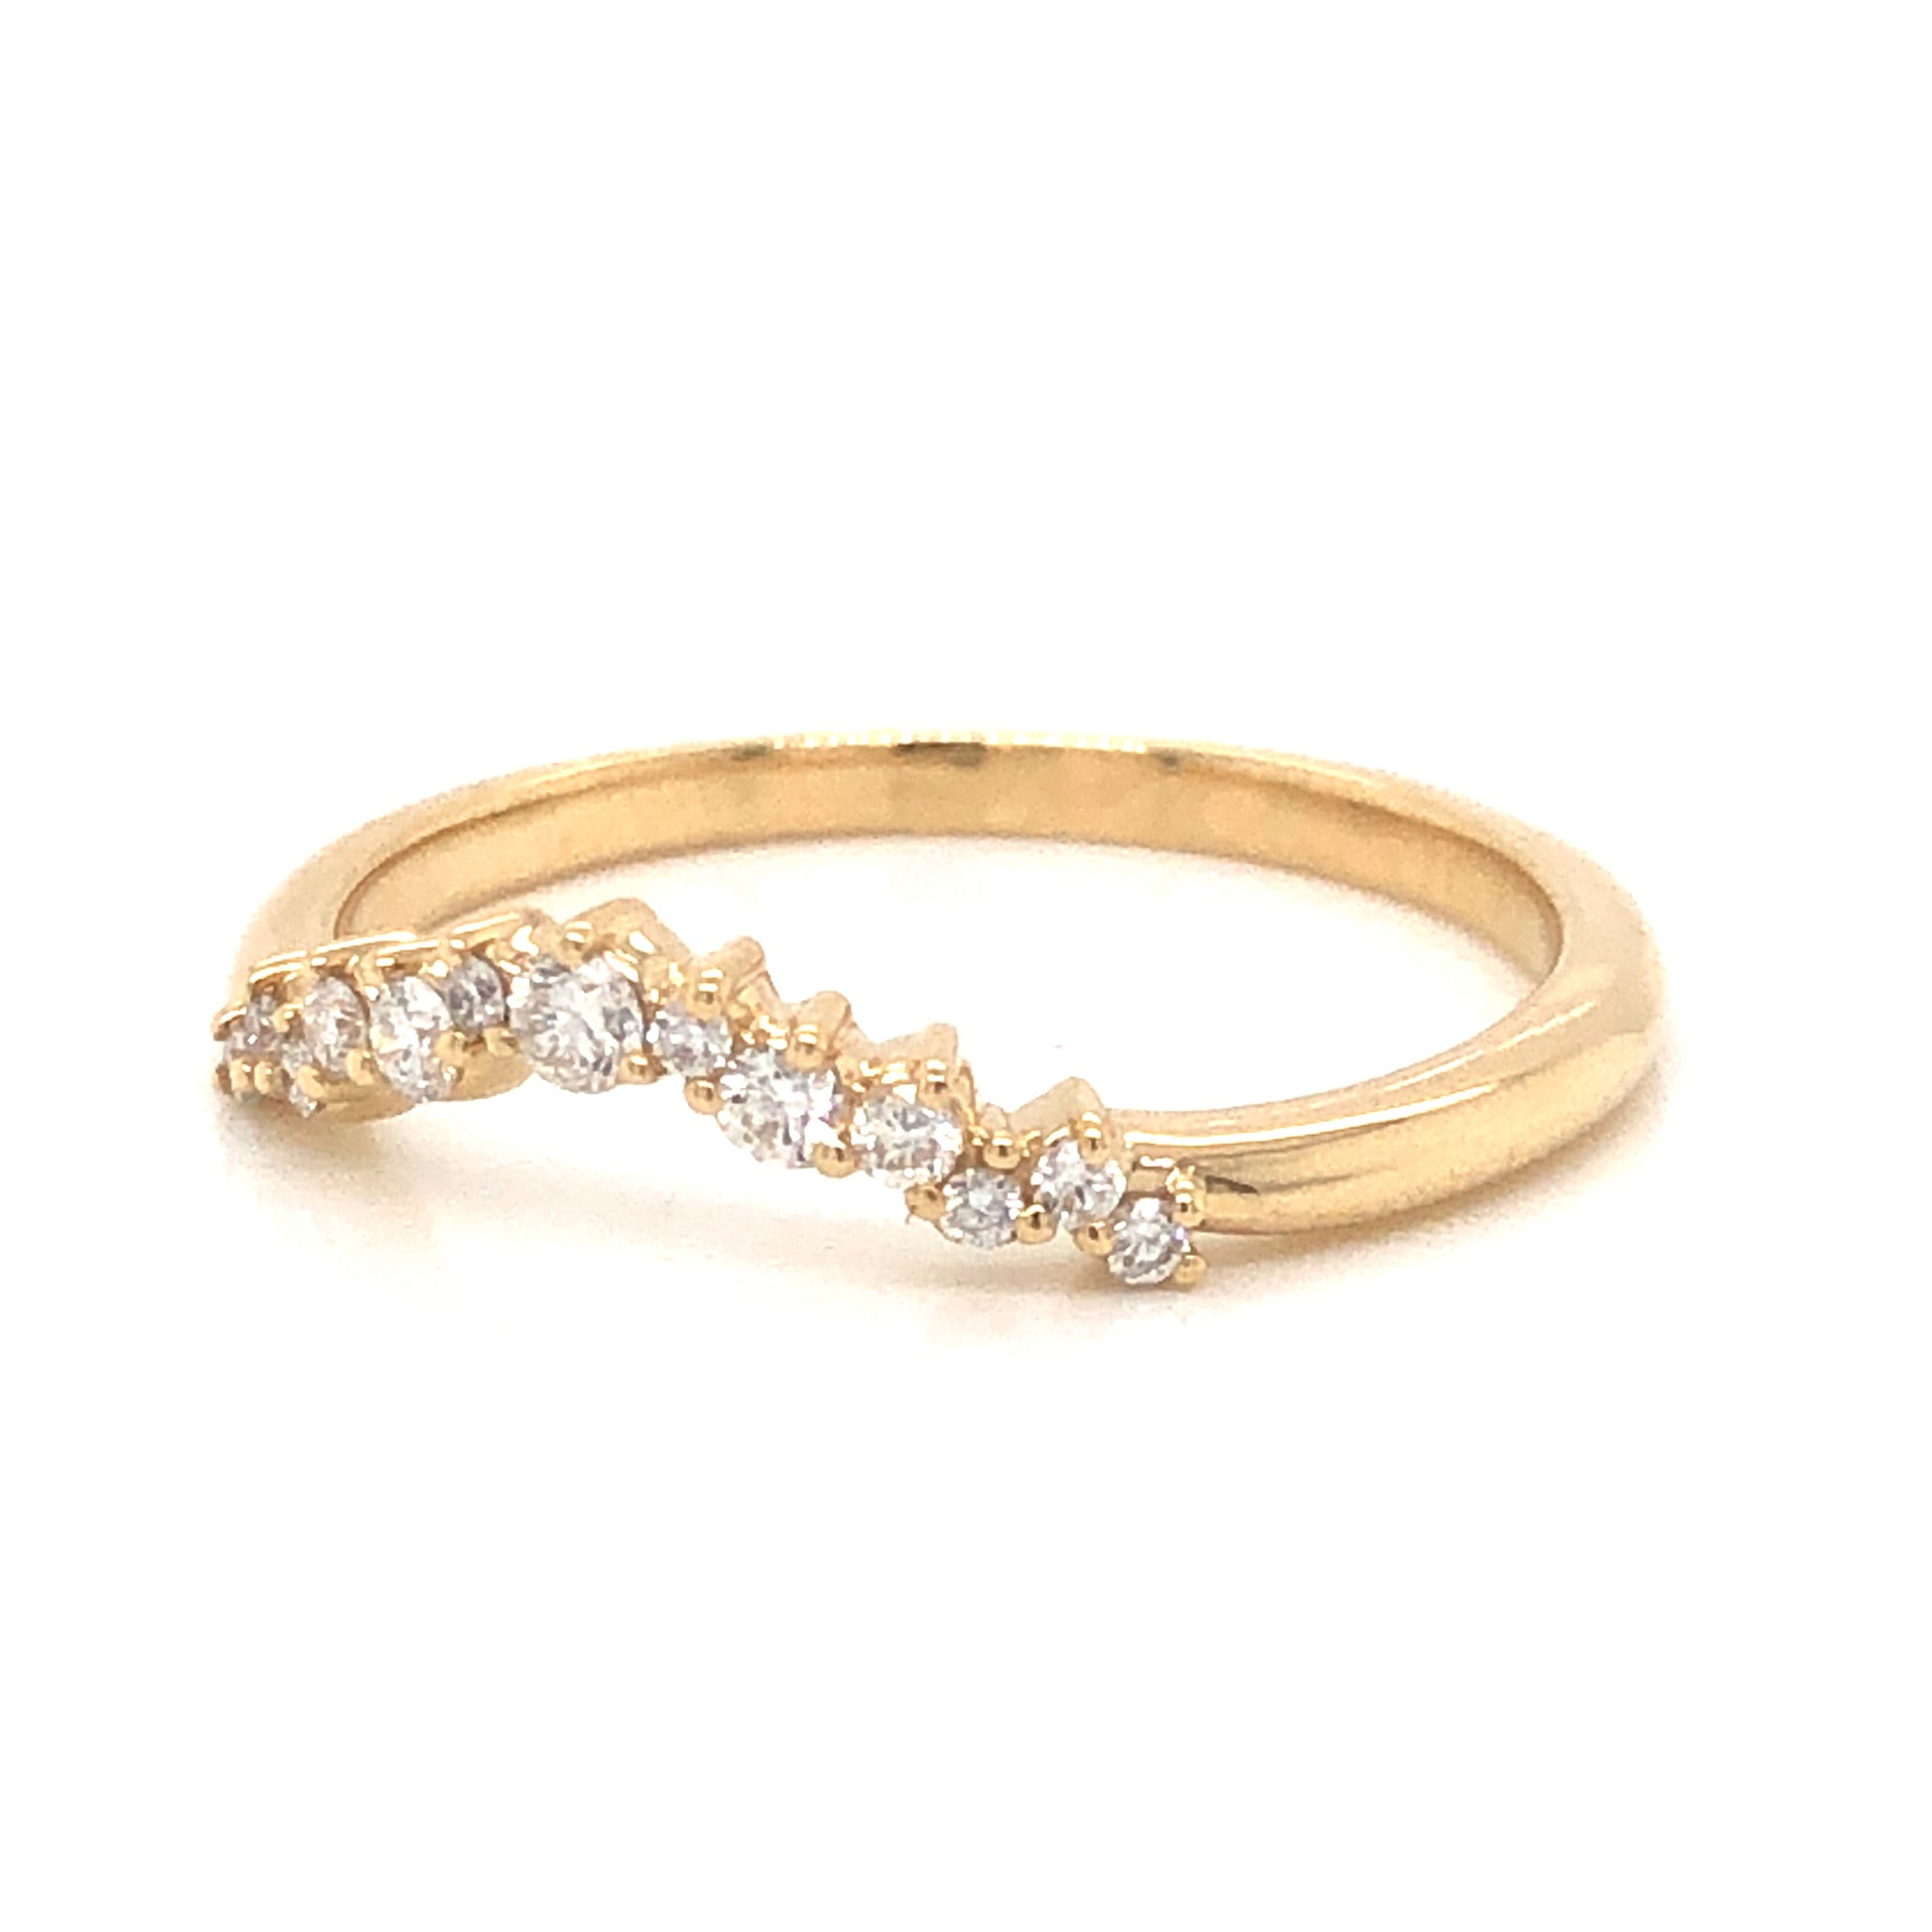 .24 Diamond Contour Wedding Band in 14k Yellow GoldComposition: 14 Karat Yellow Gold Ring Size: 7 Total Diamond Weight: .24ct Total Gram Weight: 1.9 g Inscription: 14k
      